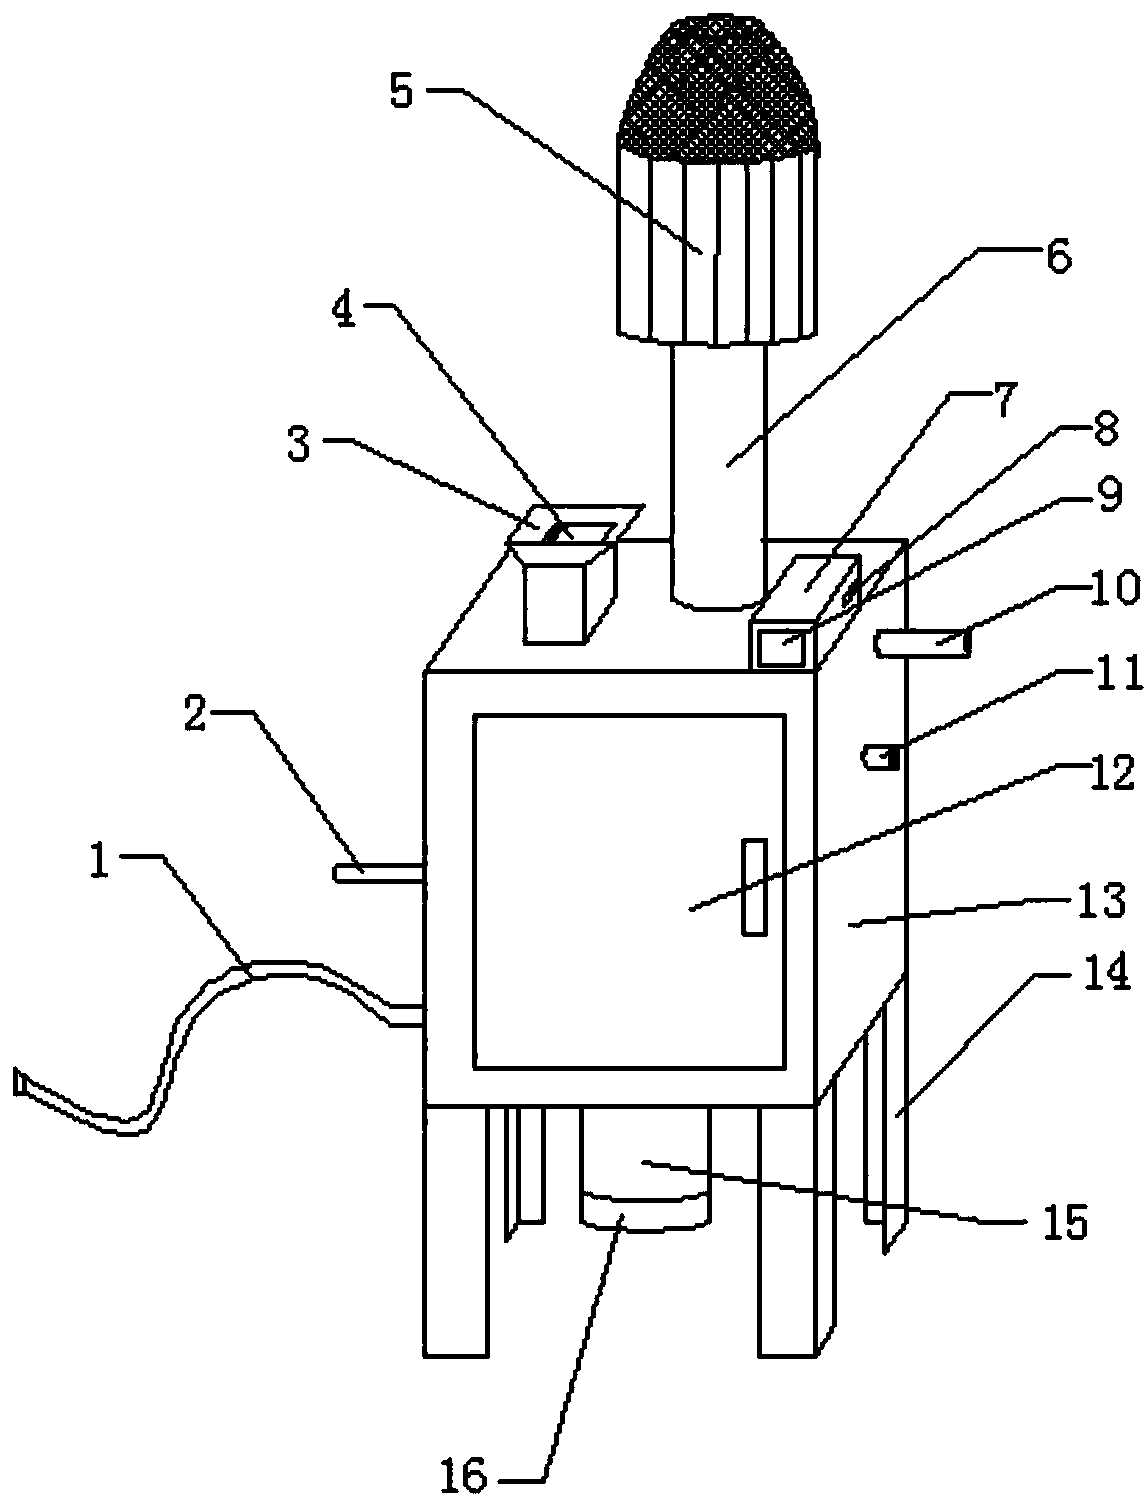 Fermentation device for functional zinc-rich feed additive